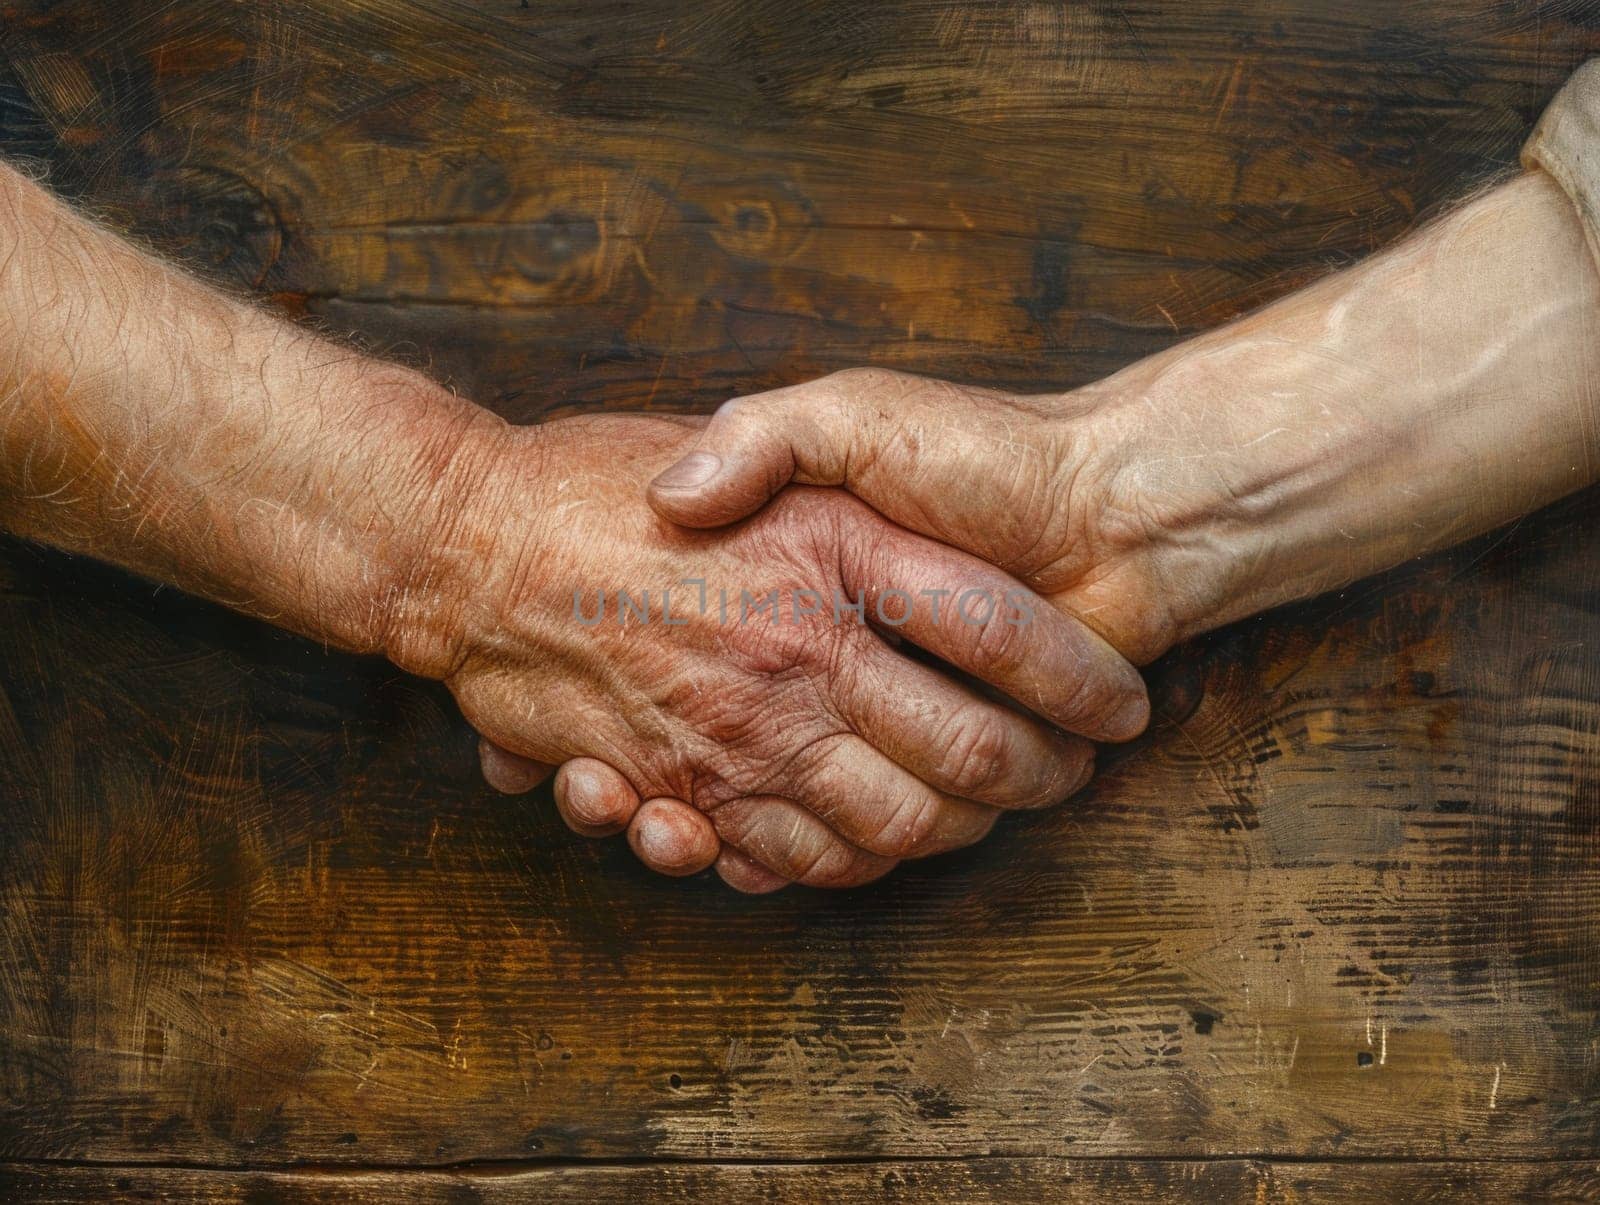 Close-up of a firm handshake between two individuals over a rustic wooden table, symbolizing agreement, trust, or partnership.